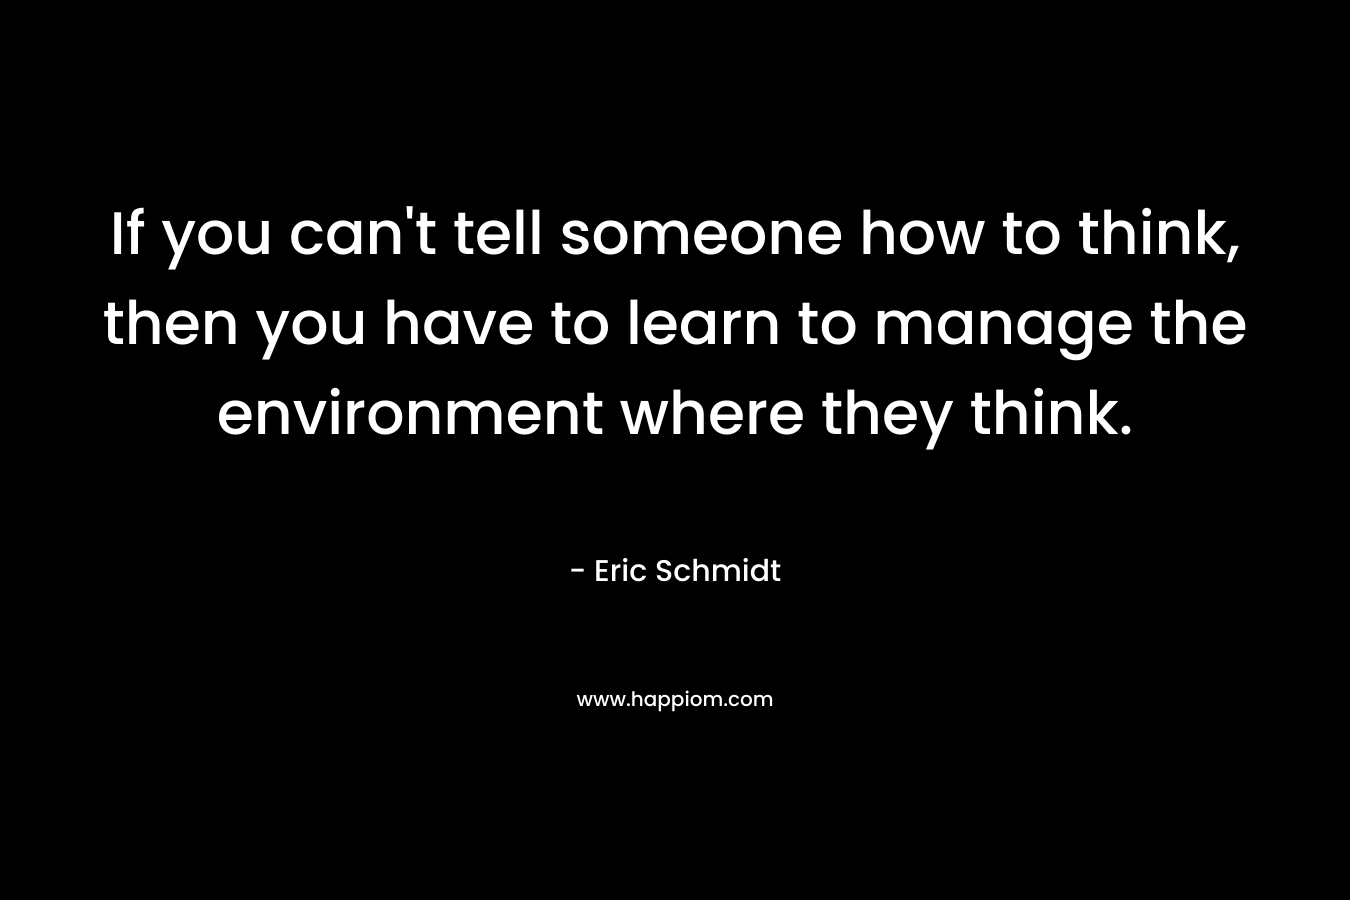 If you can't tell someone how to think, then you have to learn to manage the environment where they think.